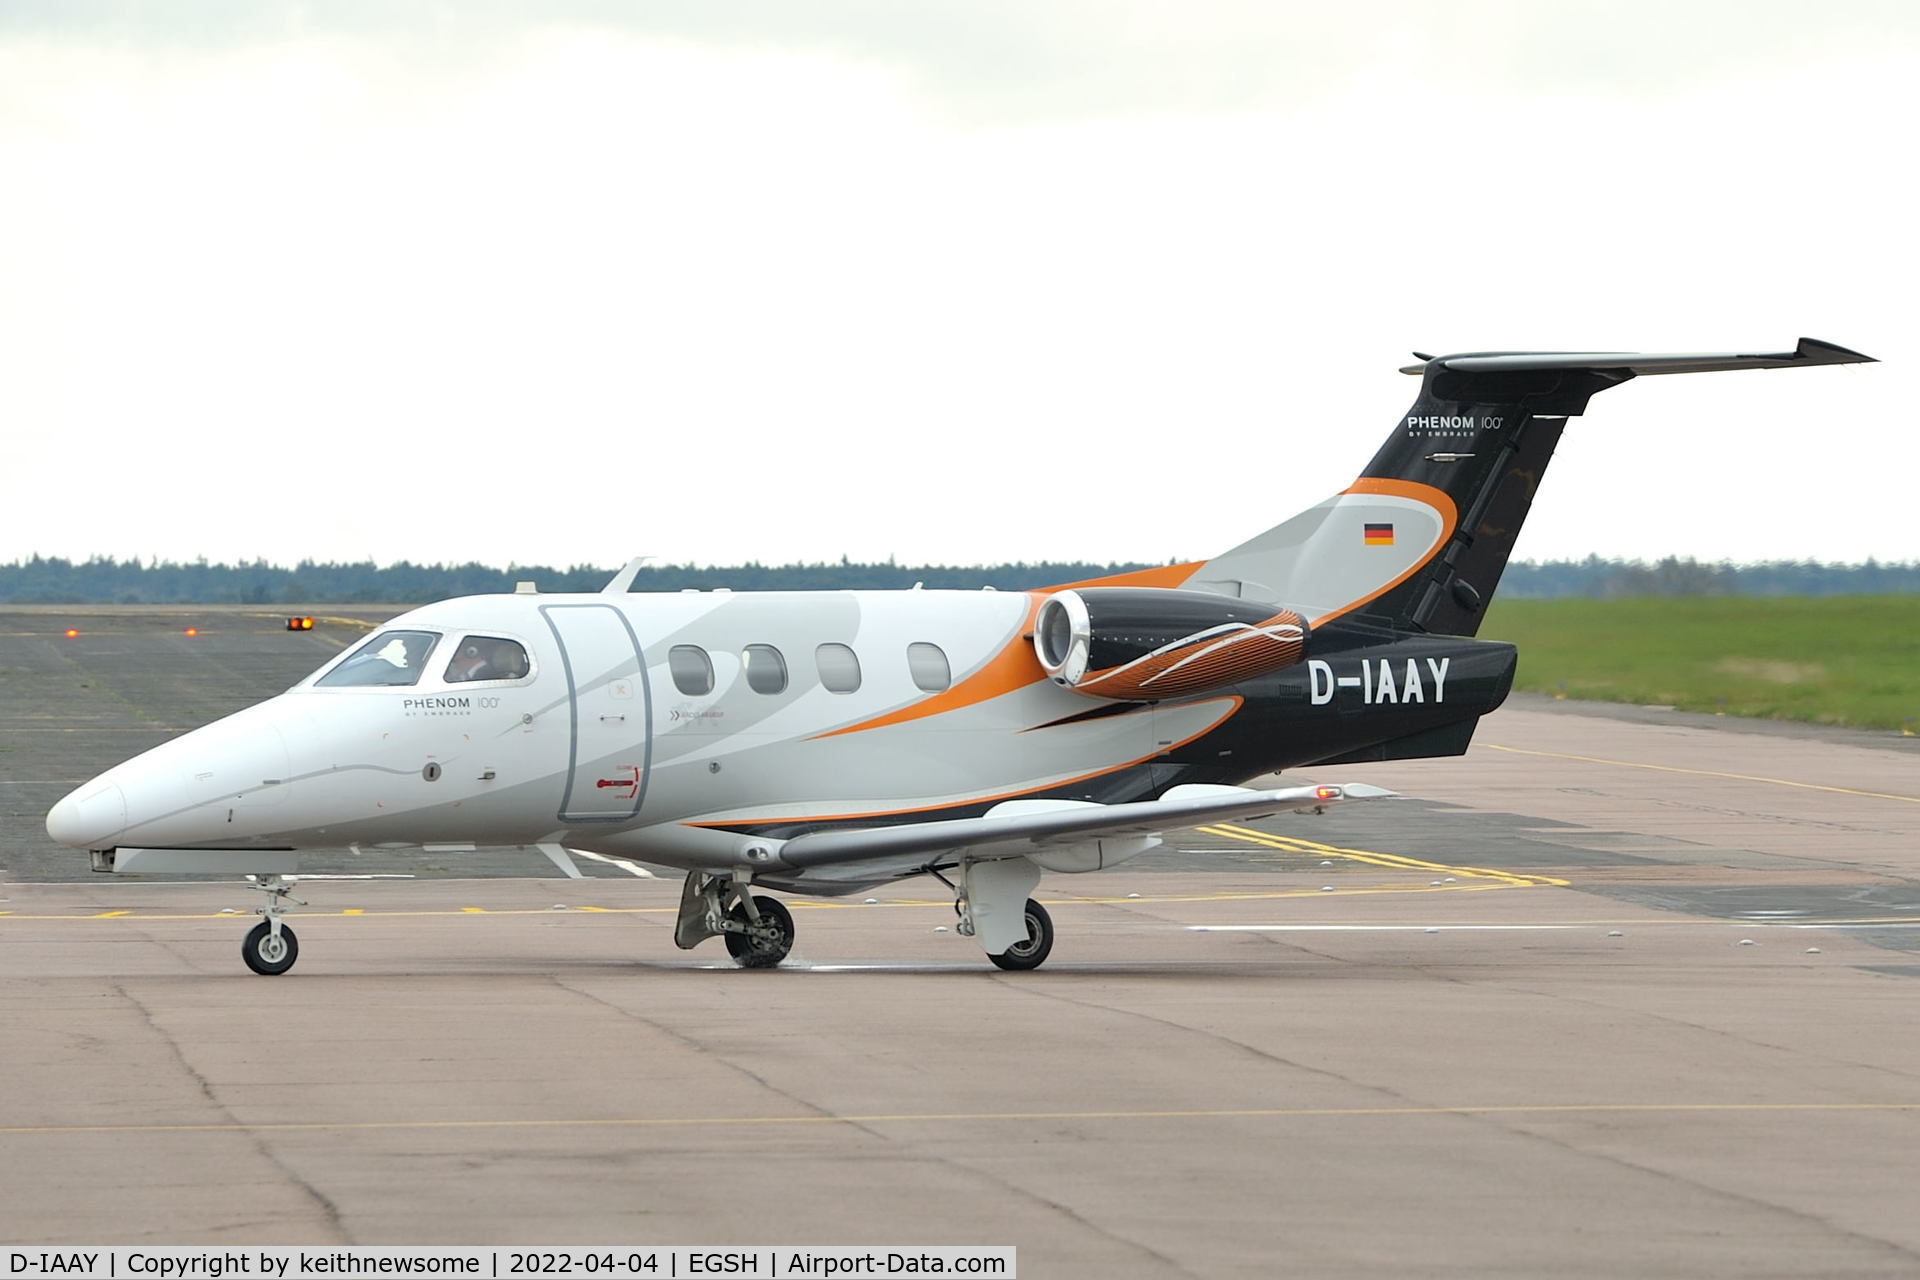 D-IAAY, 2011 Embraer EMB-500 Phenom 100 C/N 50000243, Arriving at Norwich from Biggin Hill.